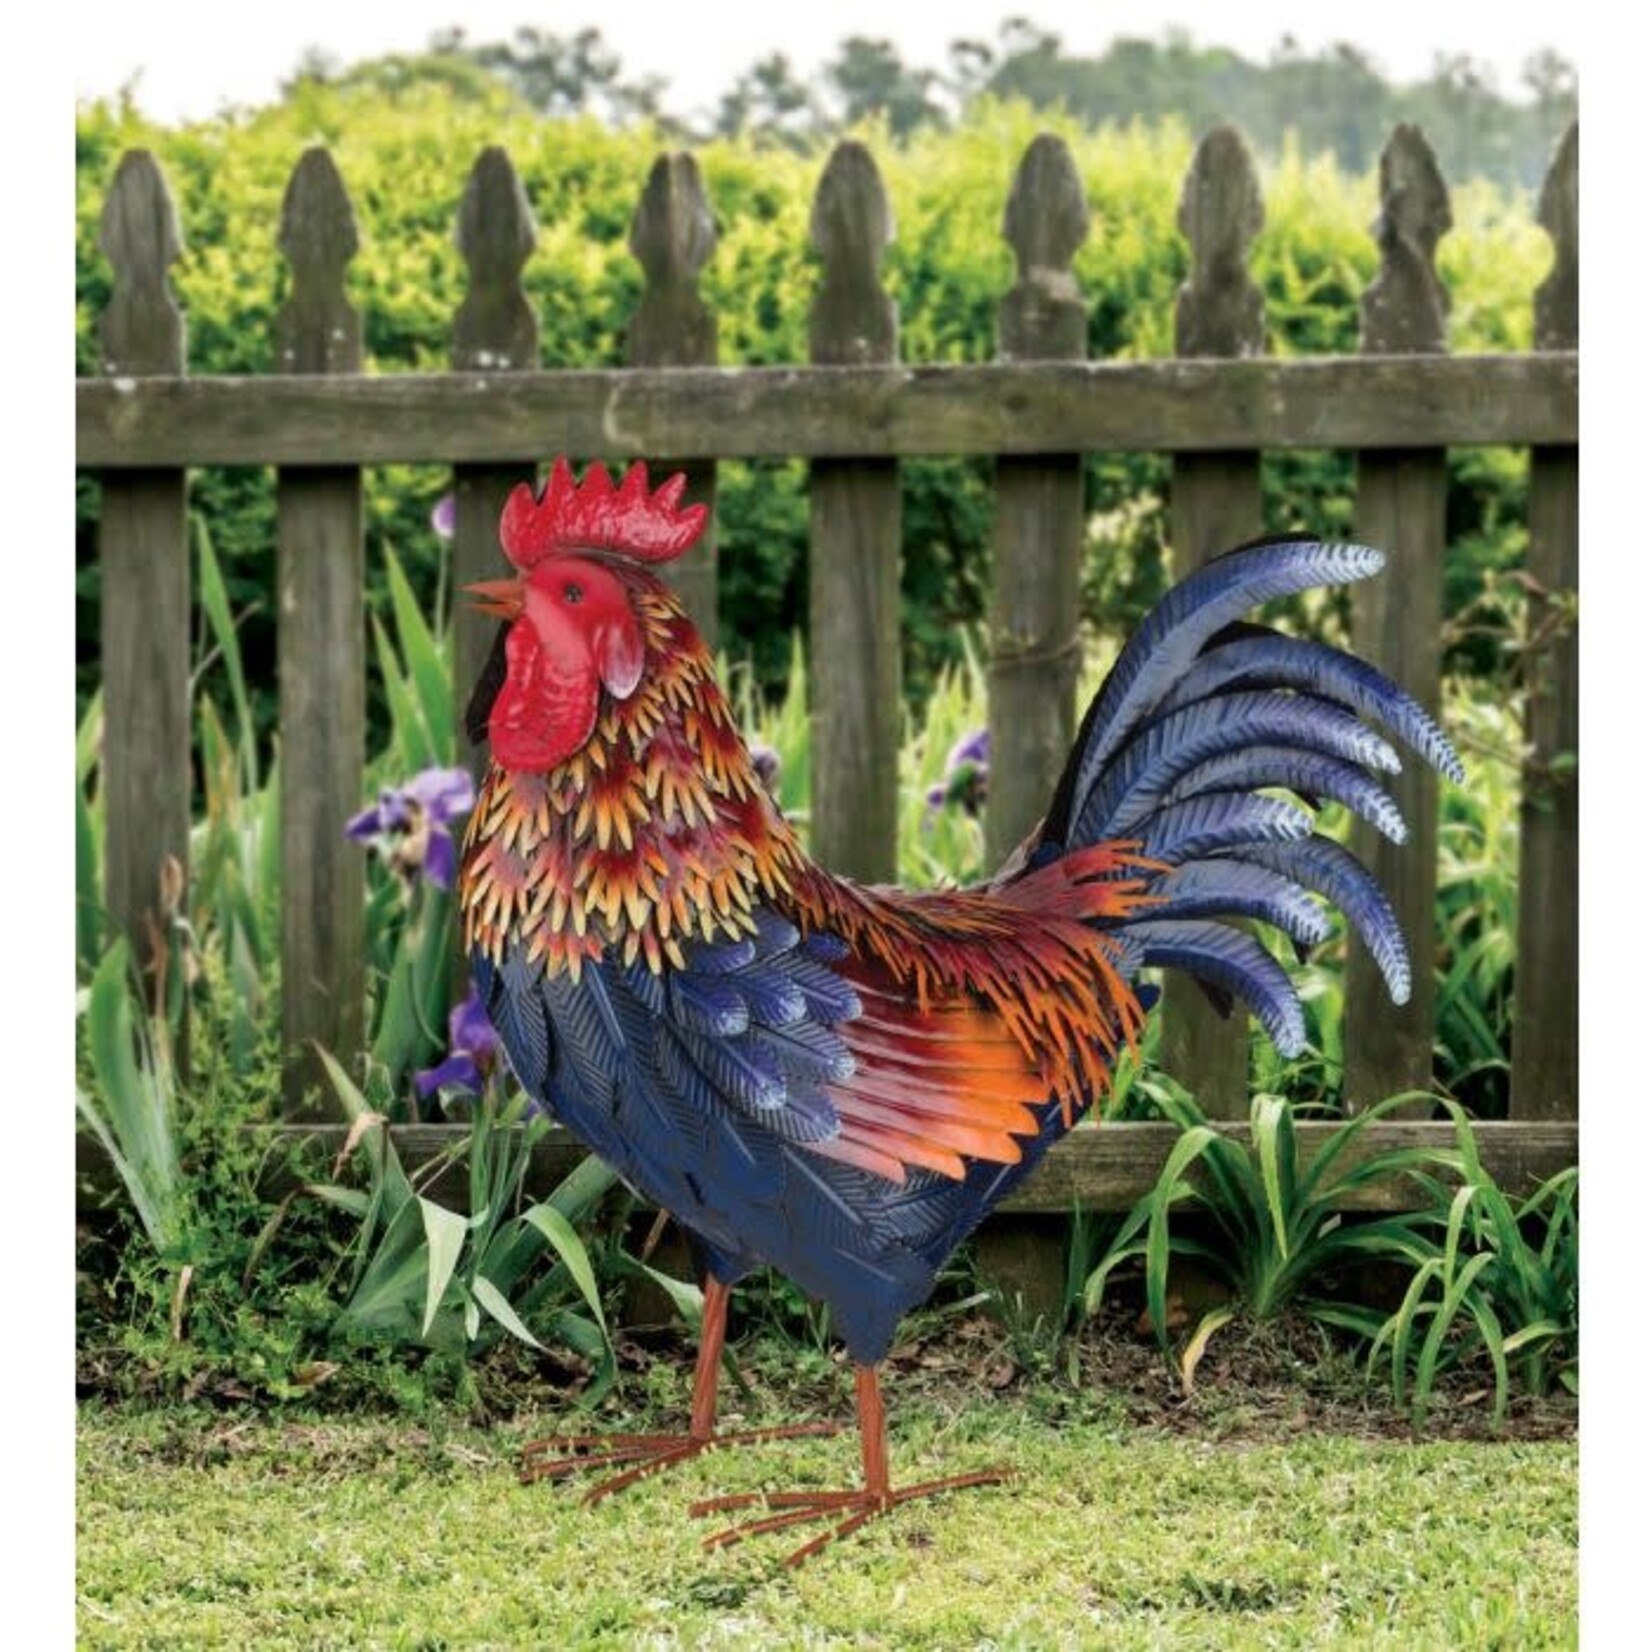 Regal Art & Gift Arroyo Rooster Decor Large